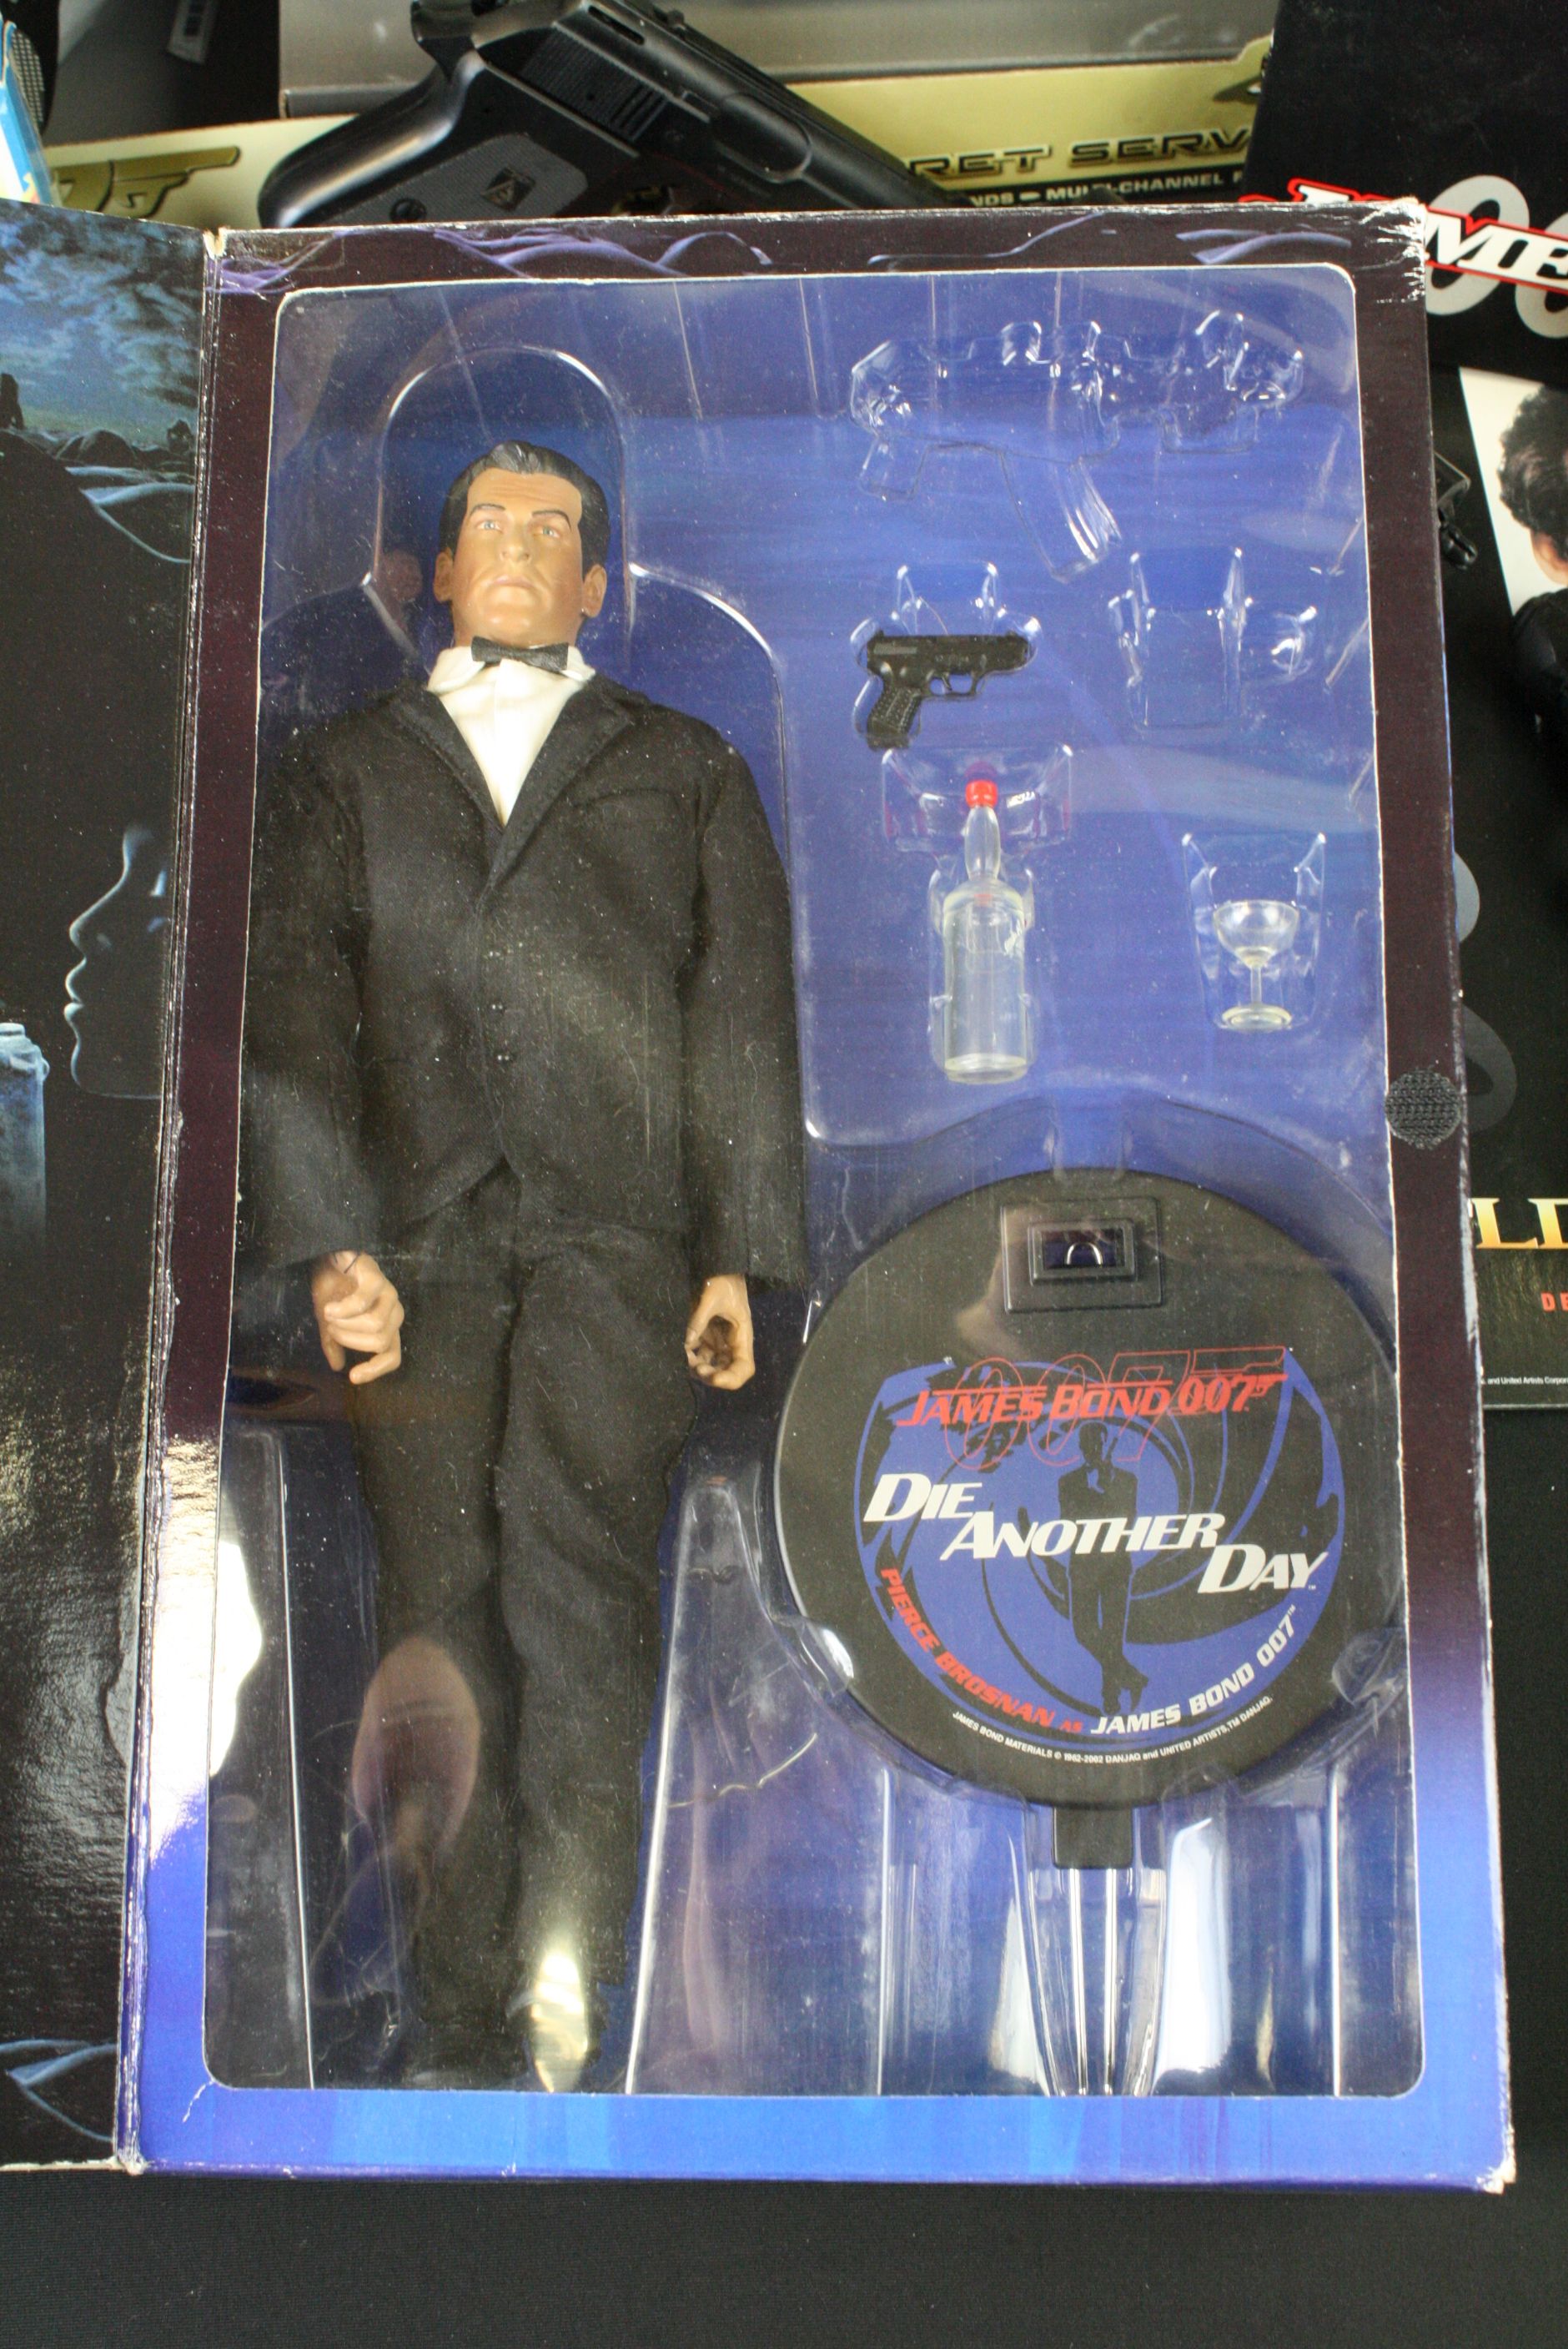 13 Boxed James Bond diecast, figures & collectibles to include Sideshow Toy Die Another Day - Image 5 of 5